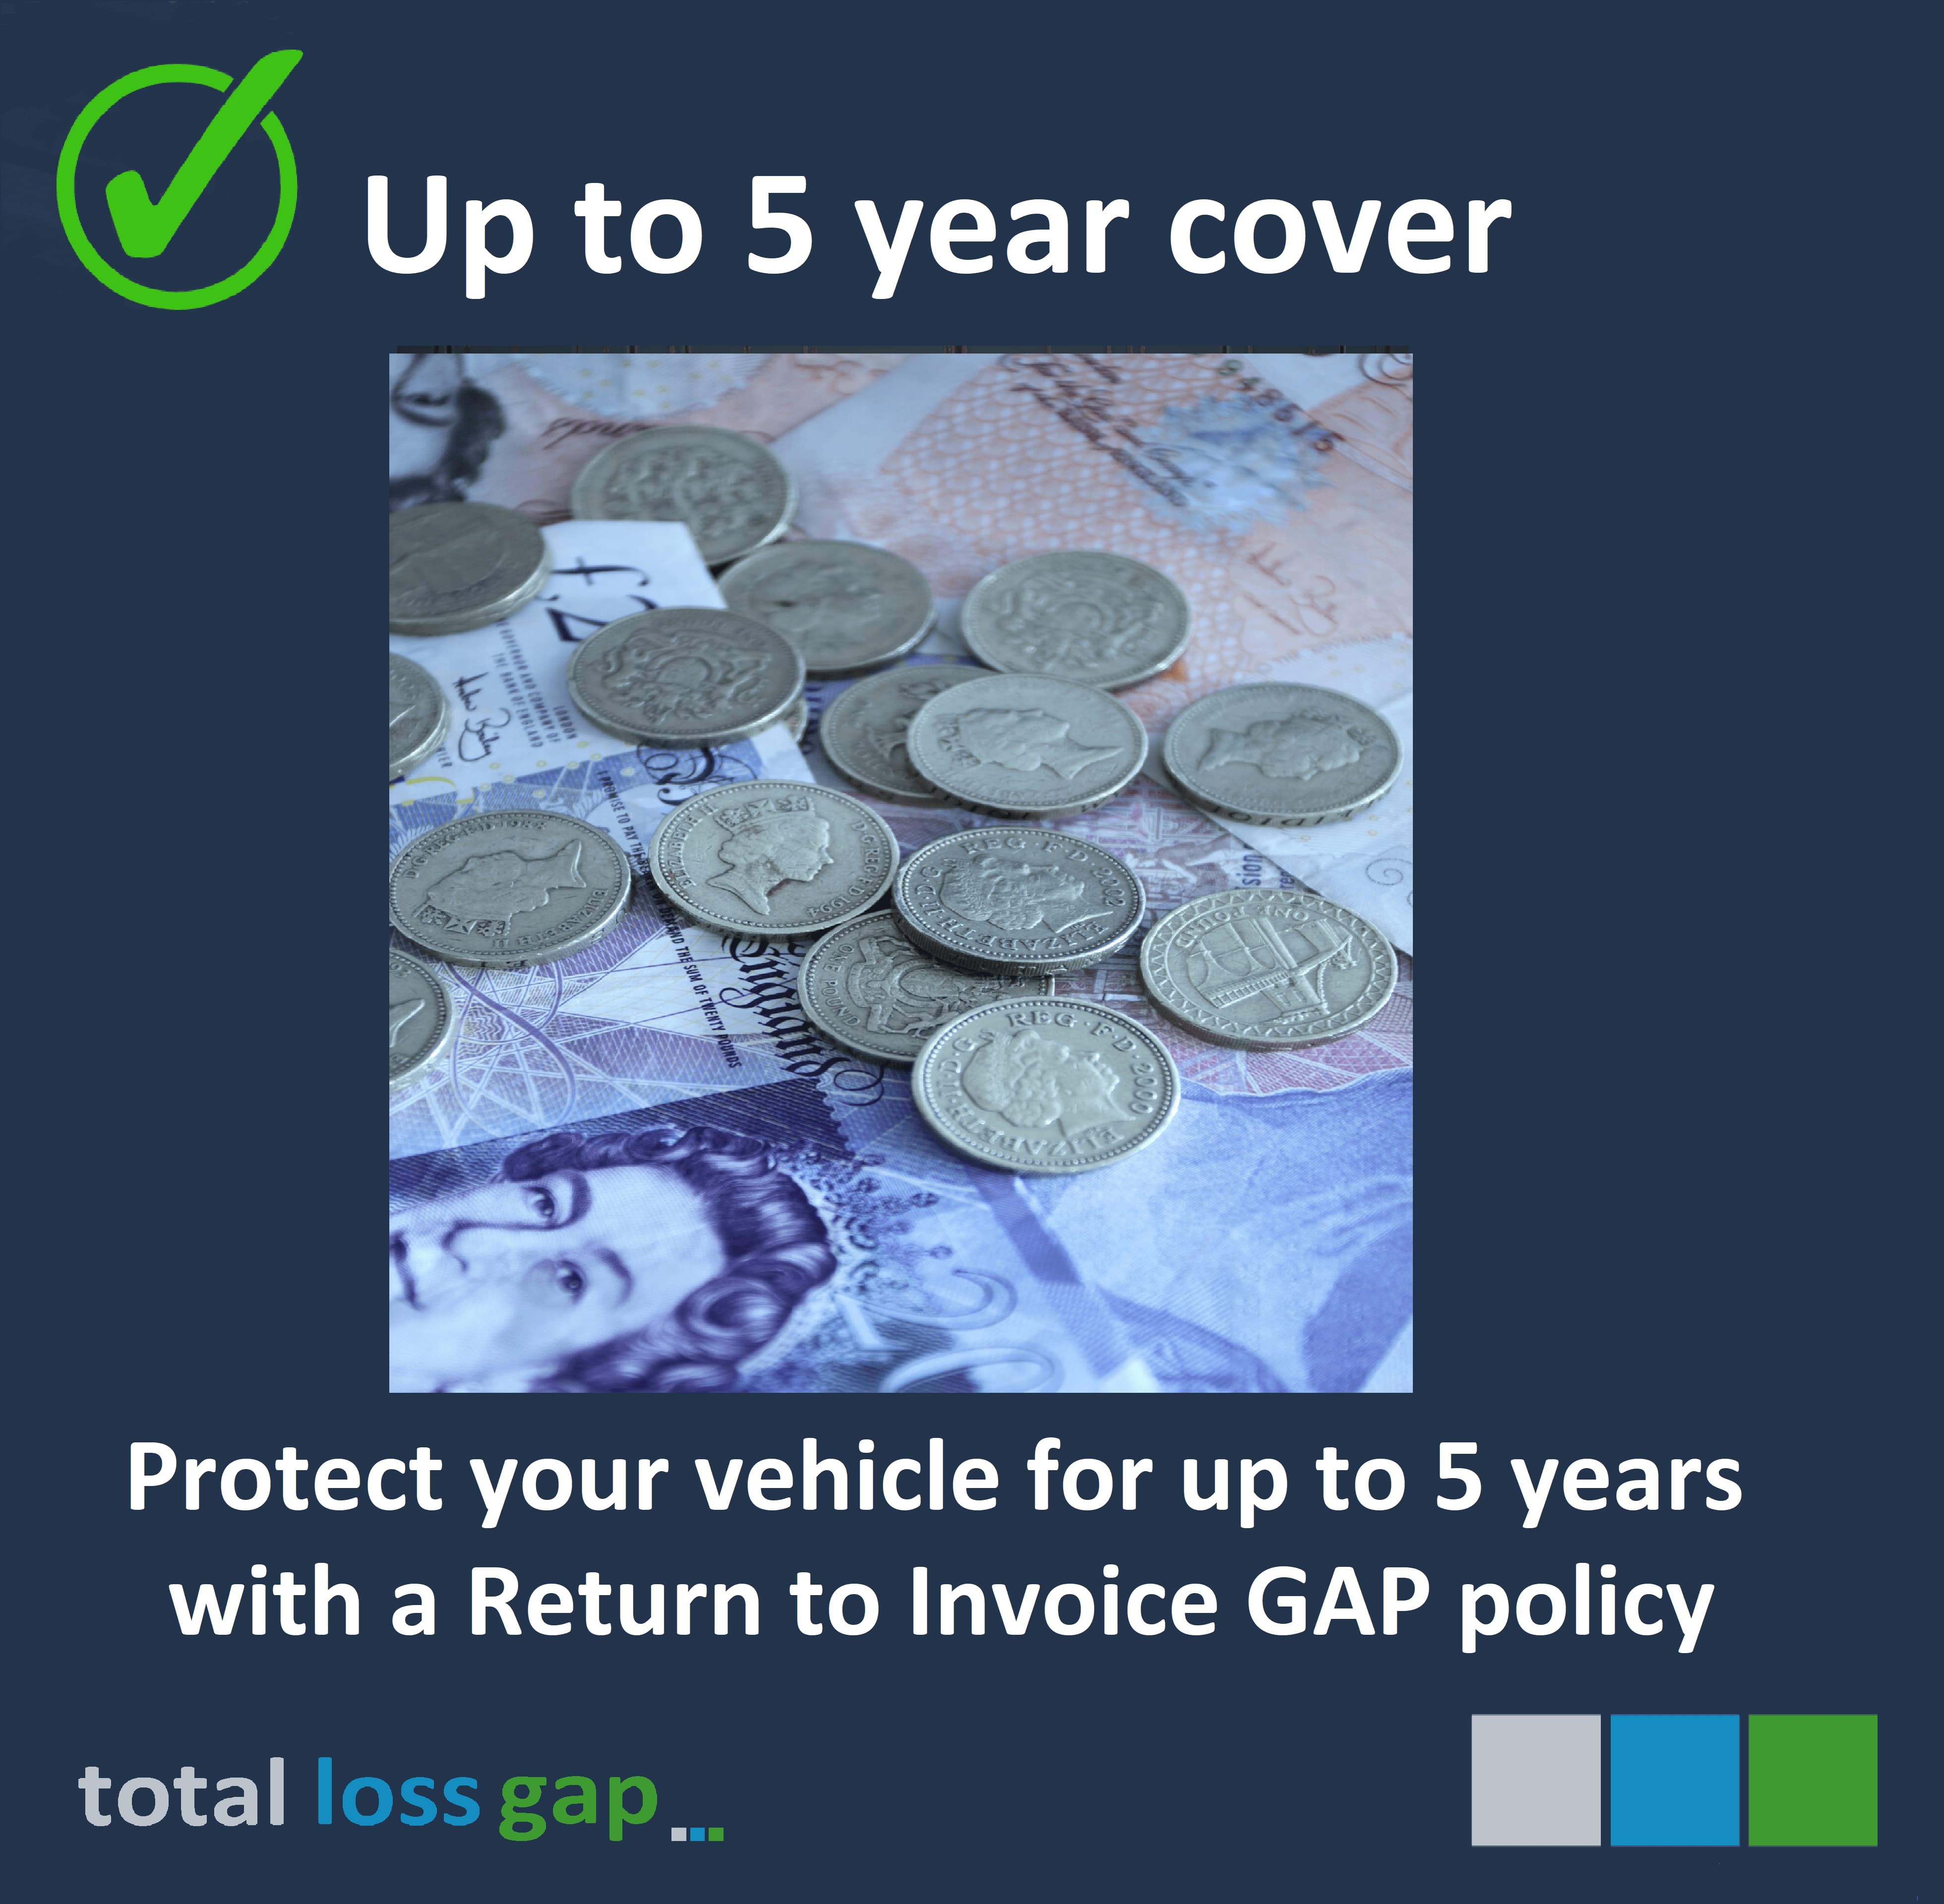 You can protect your BMW with up to 5 years Gap Insurance